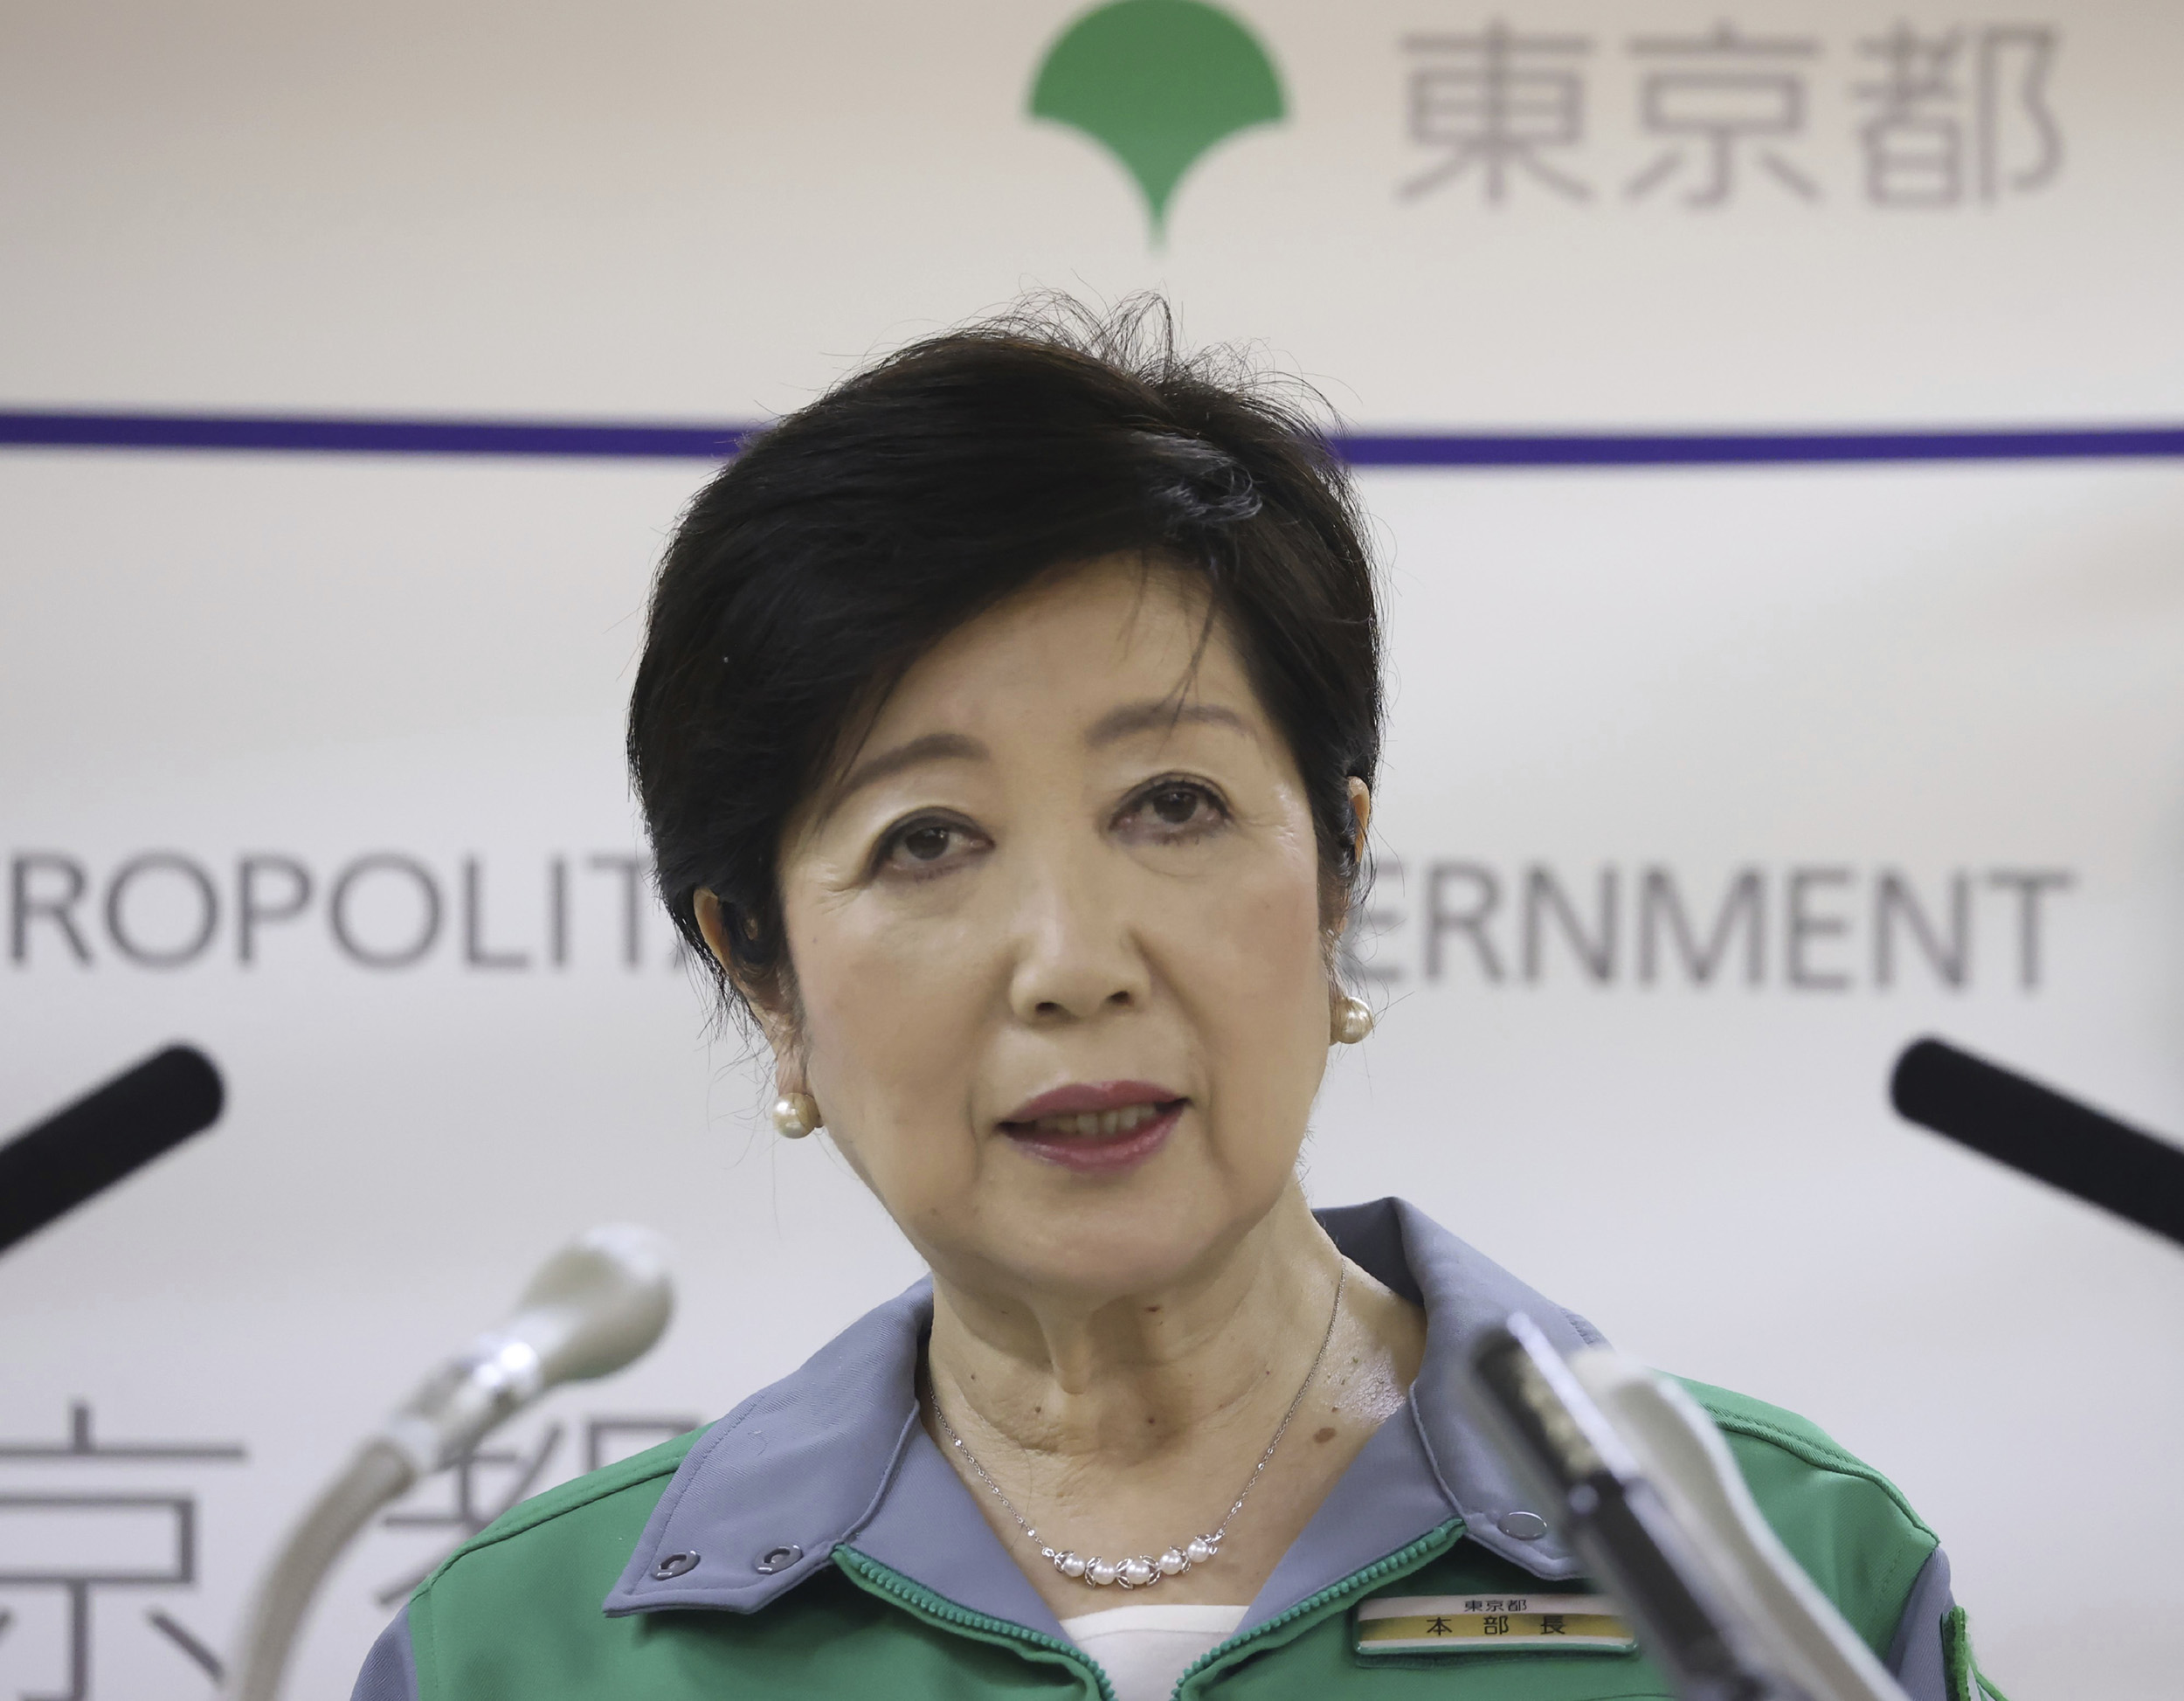 Governor of Tokyo Yuriko Koike, announced that her government decided to lower its coronavirus rank and loosen voluntary refrainment from large-scale public events, traveling and dining out at the Tokyo Metropolitan Government Office on September 10.